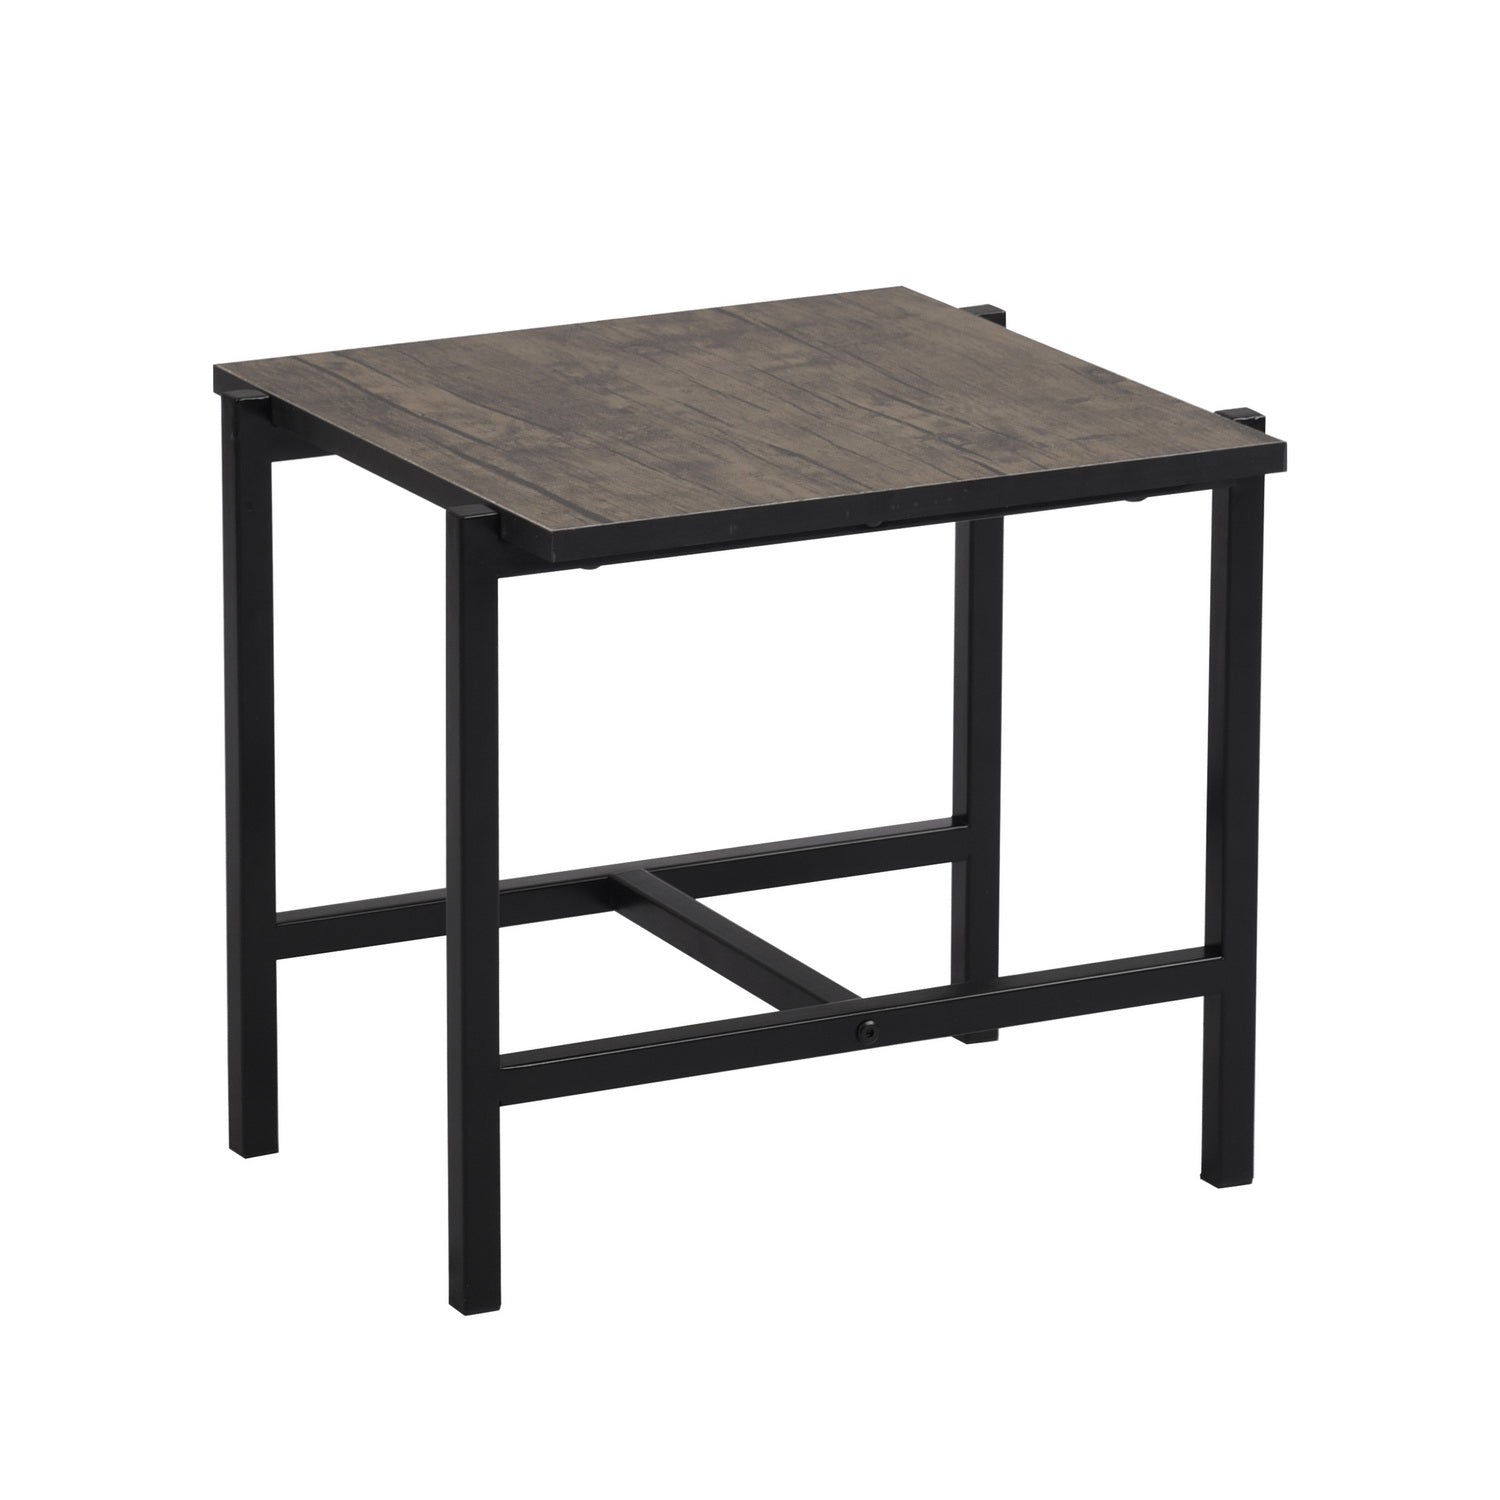 Rectangular end table in metal and dark wood, industrial style - GRECO WOOD COFFEE TABLE SMALL B